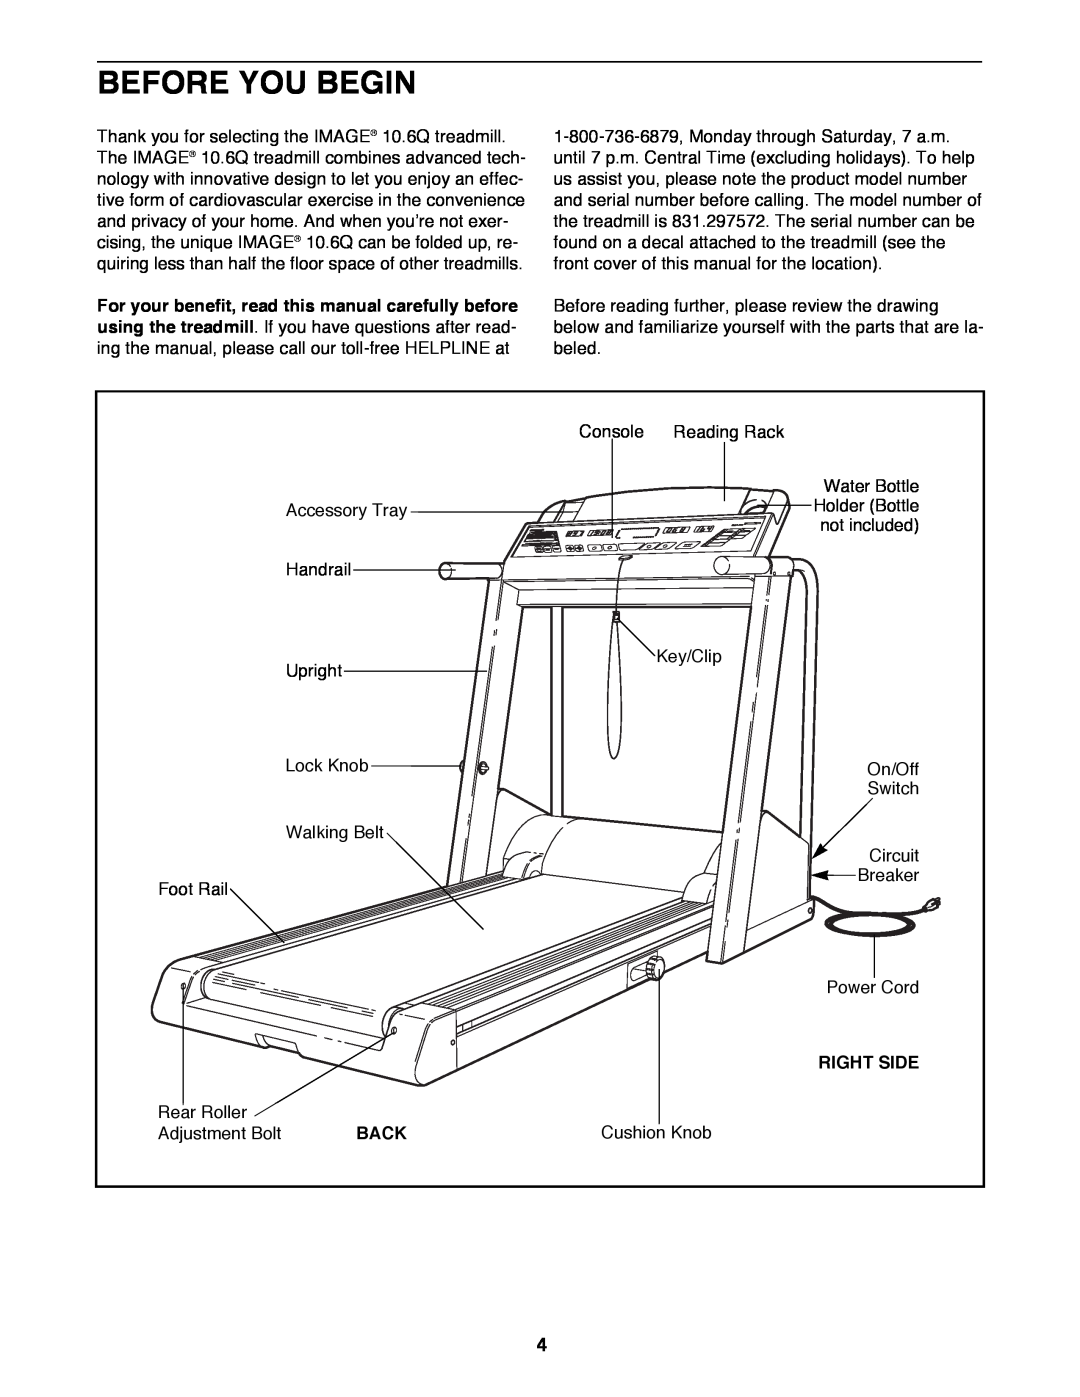 Image 831.297572 user manual Before You Begin, Right Side, Back 